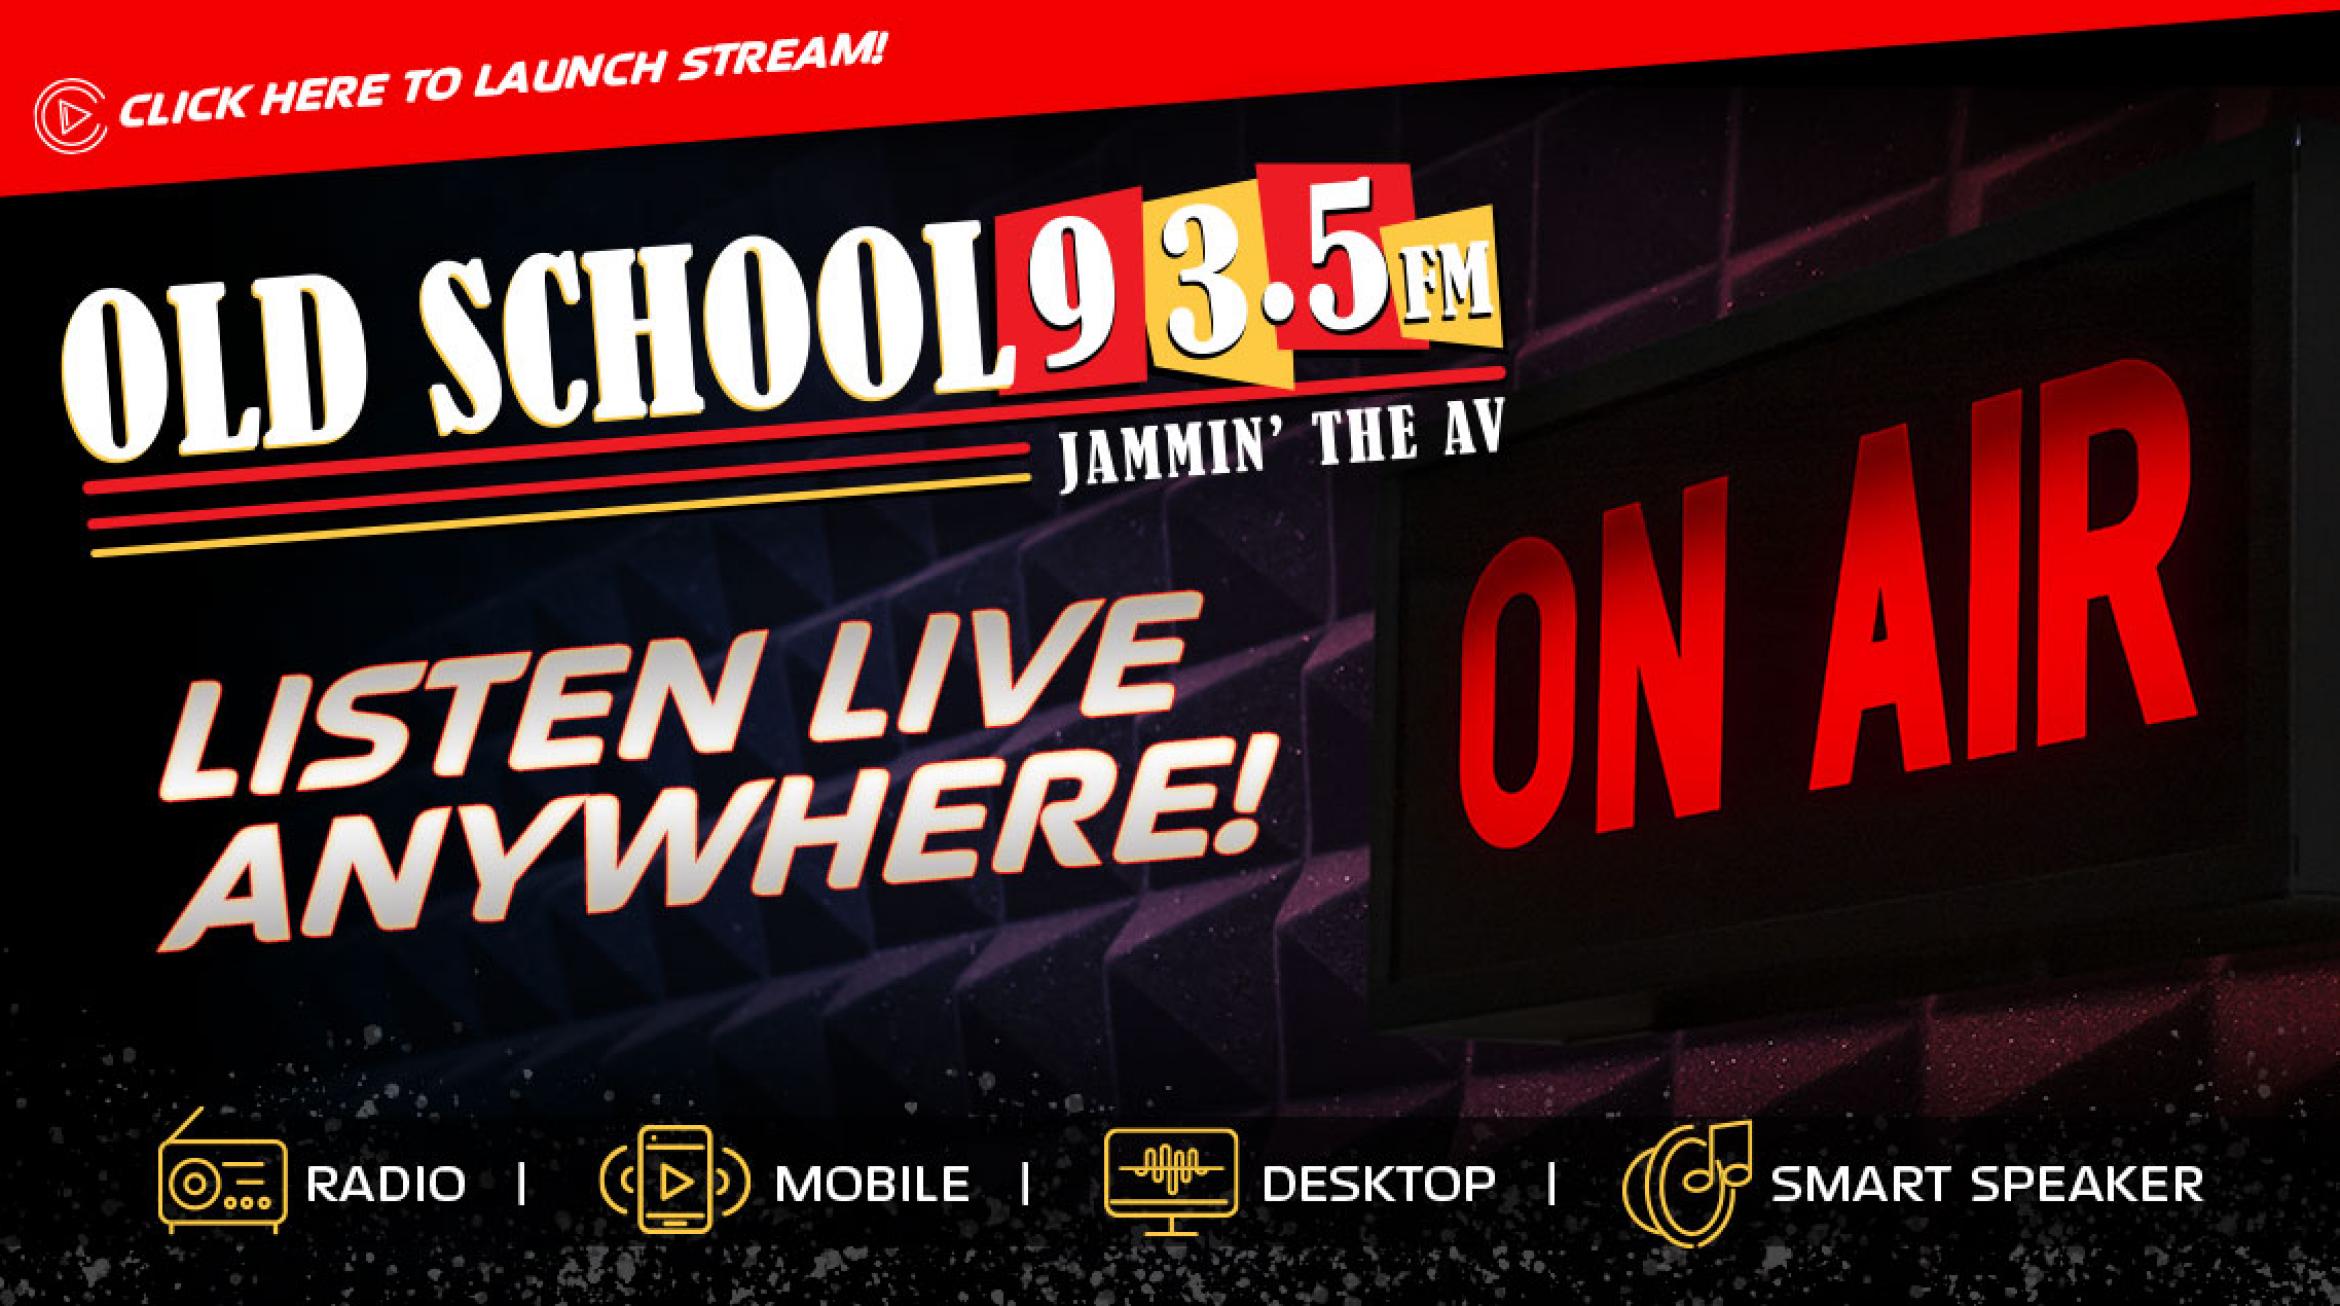 1140x635 ListenLive Anywhere Oldschool935